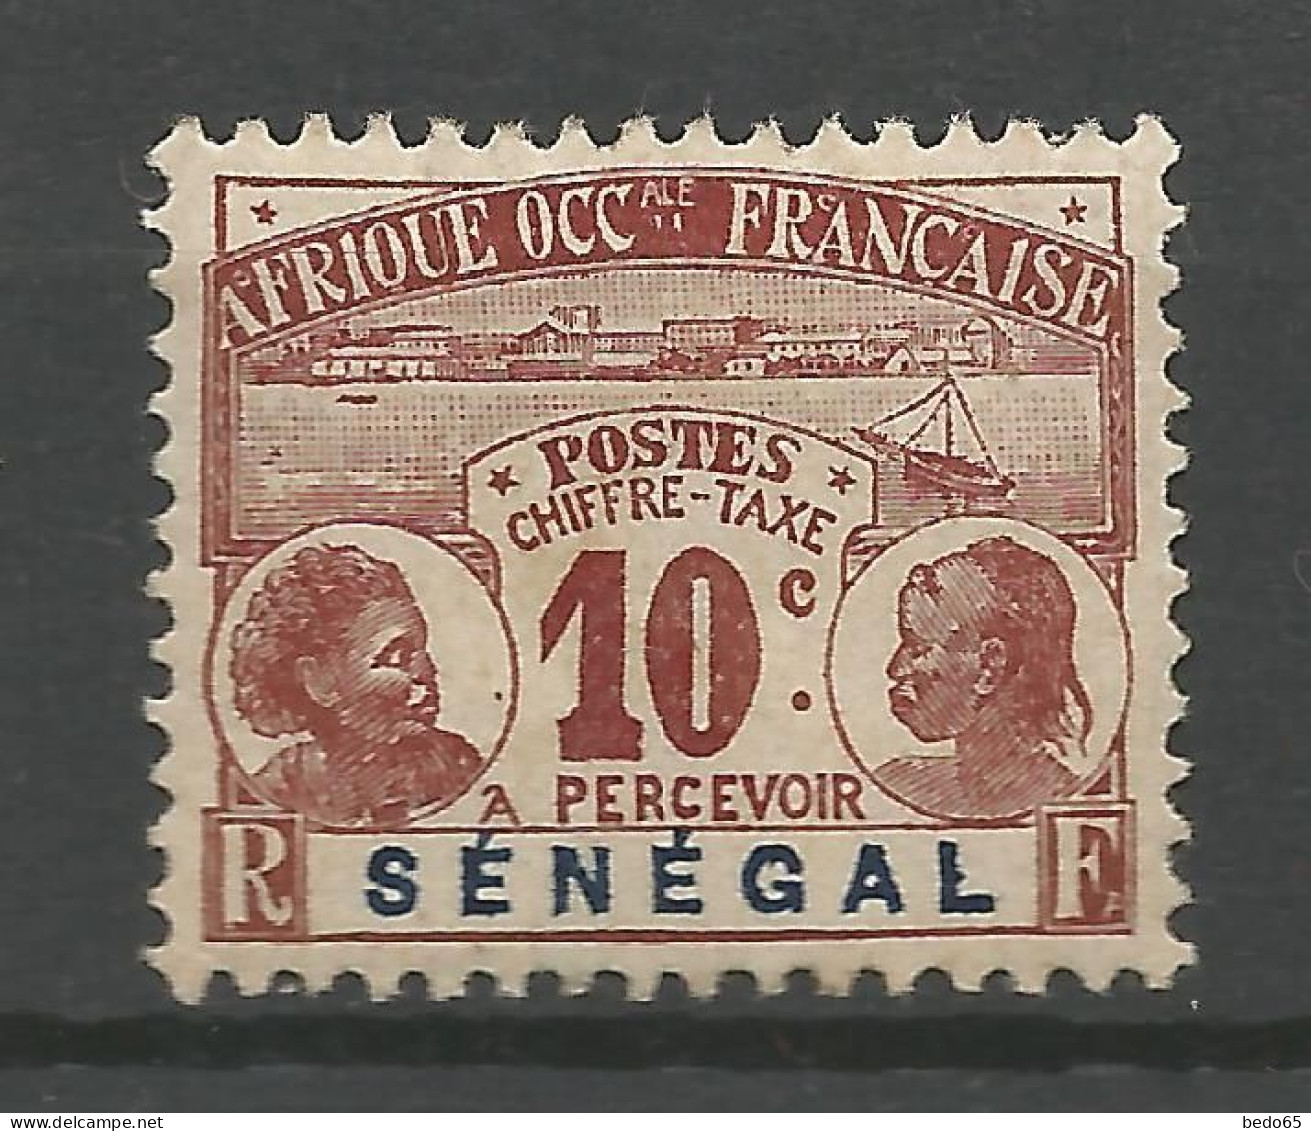 SENEGAL TAXE N° 5 NEUF*  CHARNIERE   / Hinge / MH - Timbres-taxe